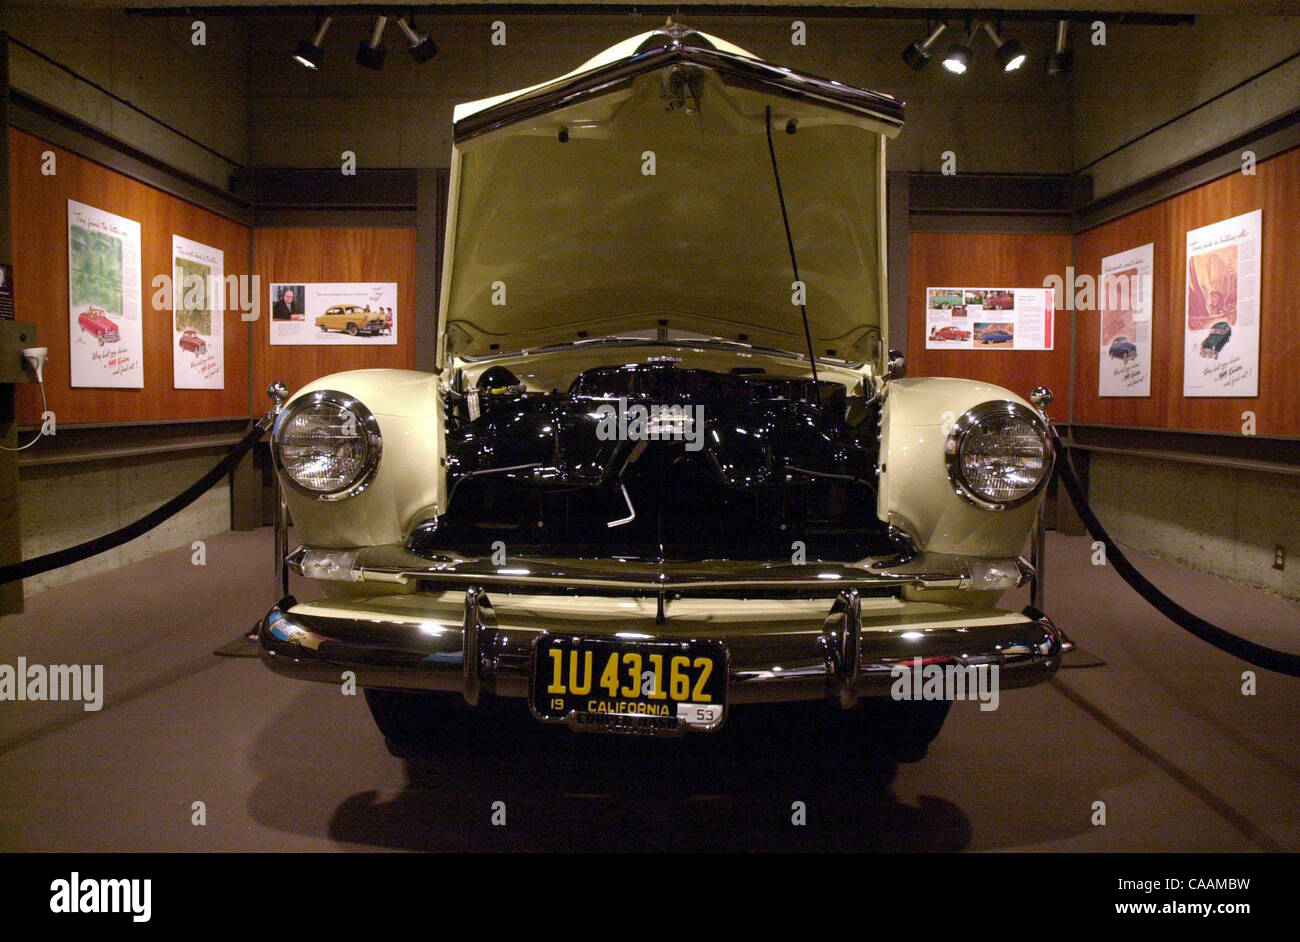 Henry J Kaiser Think Big Is A New Historical Exhibit On Display At The Oakland Museum Includes A 1950 Henry J The First Economical Car Of Its Time Contra Costa Newspapers Joanna Jhanda 04